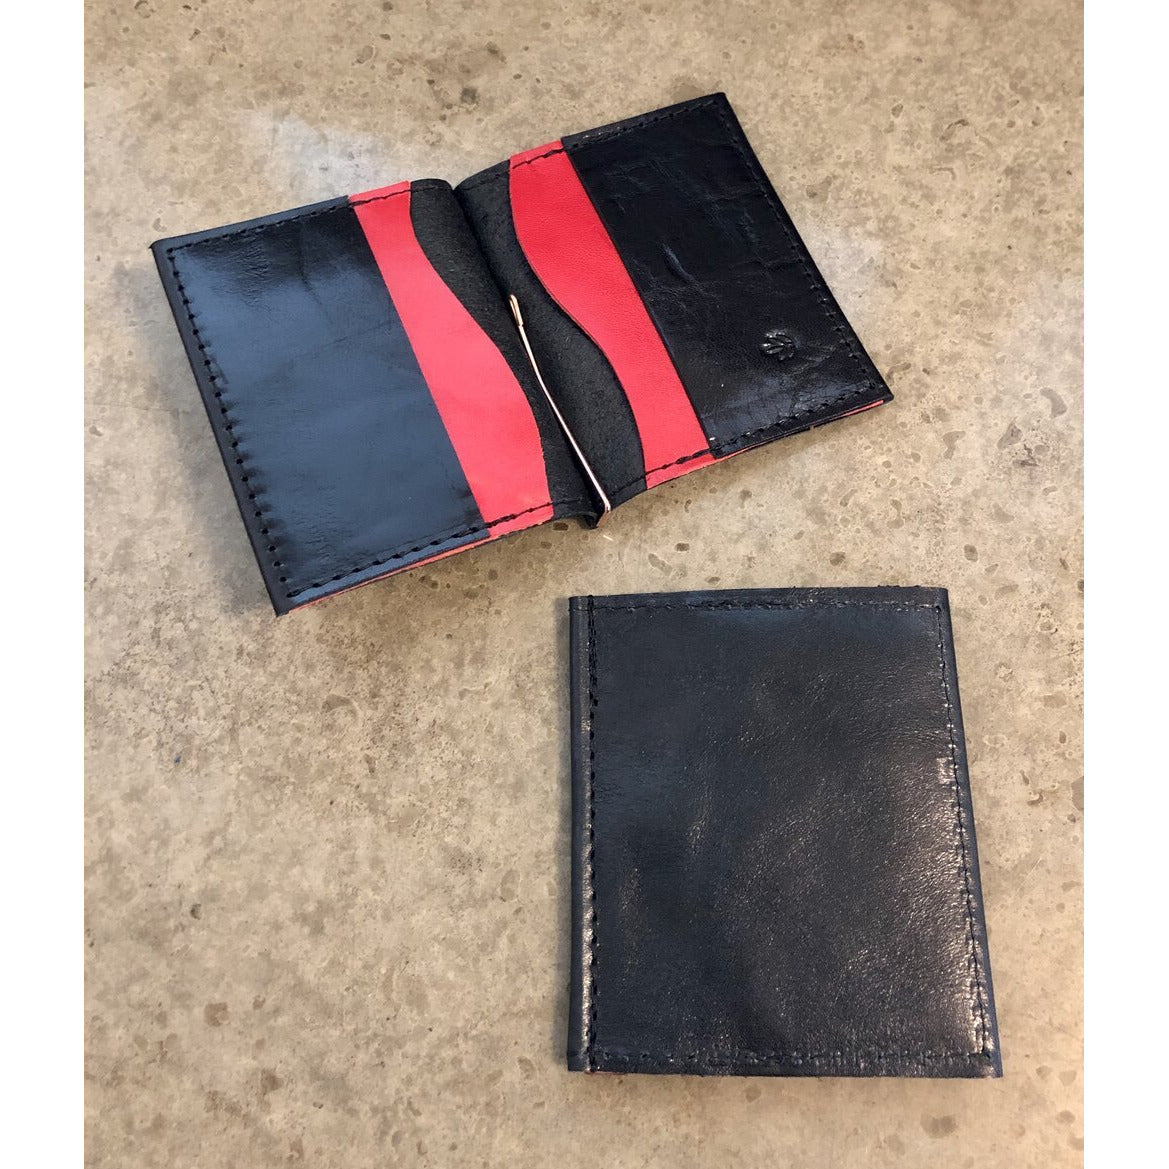 Leather Money Clip Wallet, black with red pockets